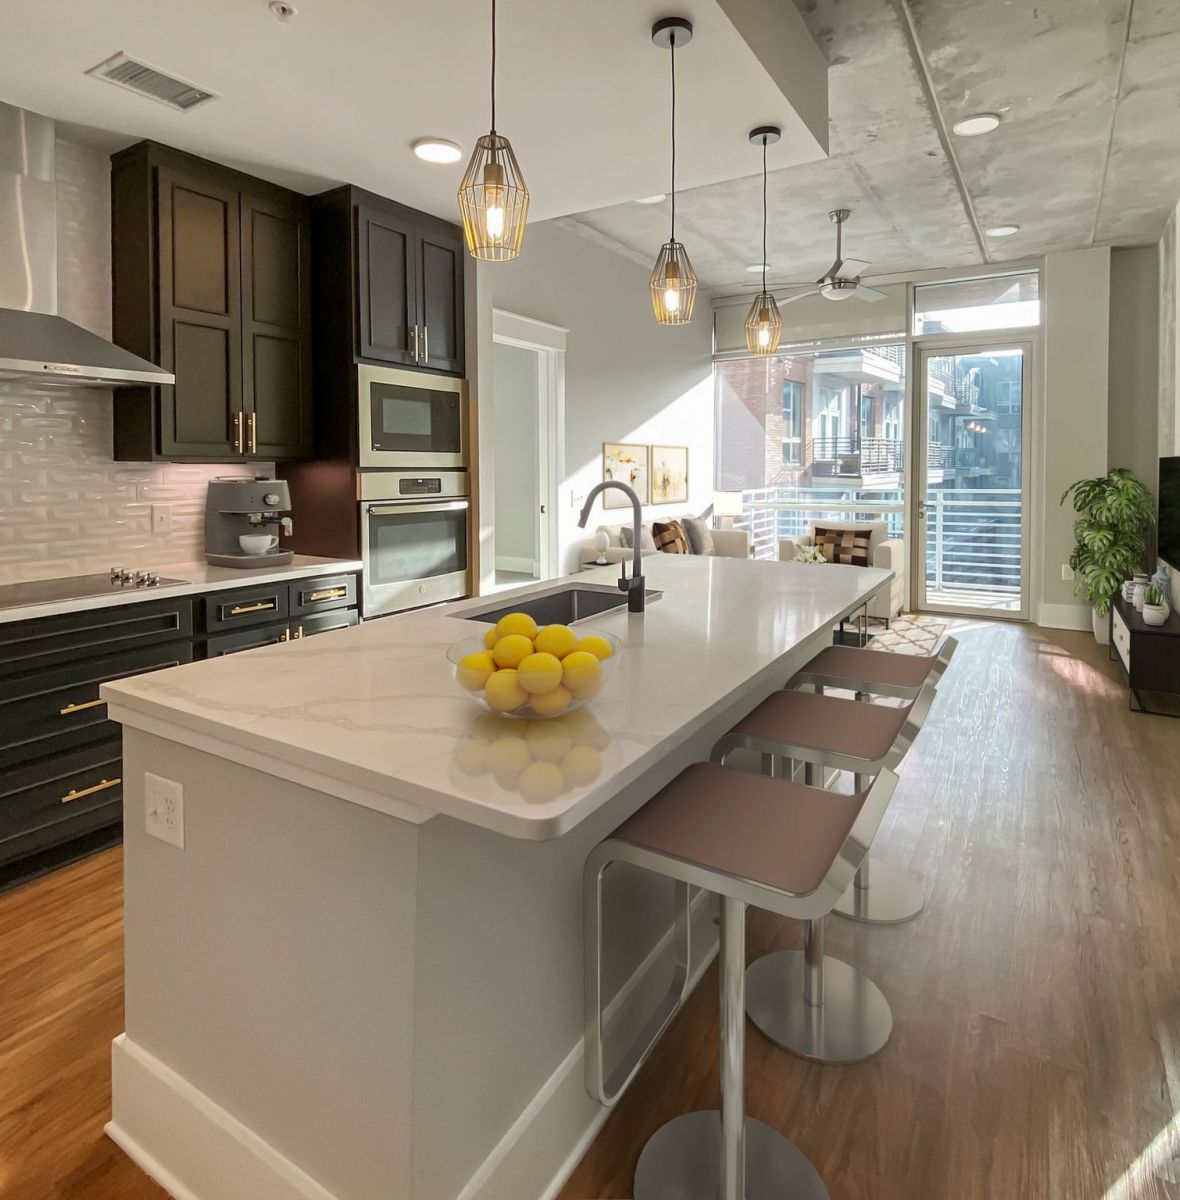 Providence Row apartment kitchen with island, stainless steel appliances, and beautiful finishes